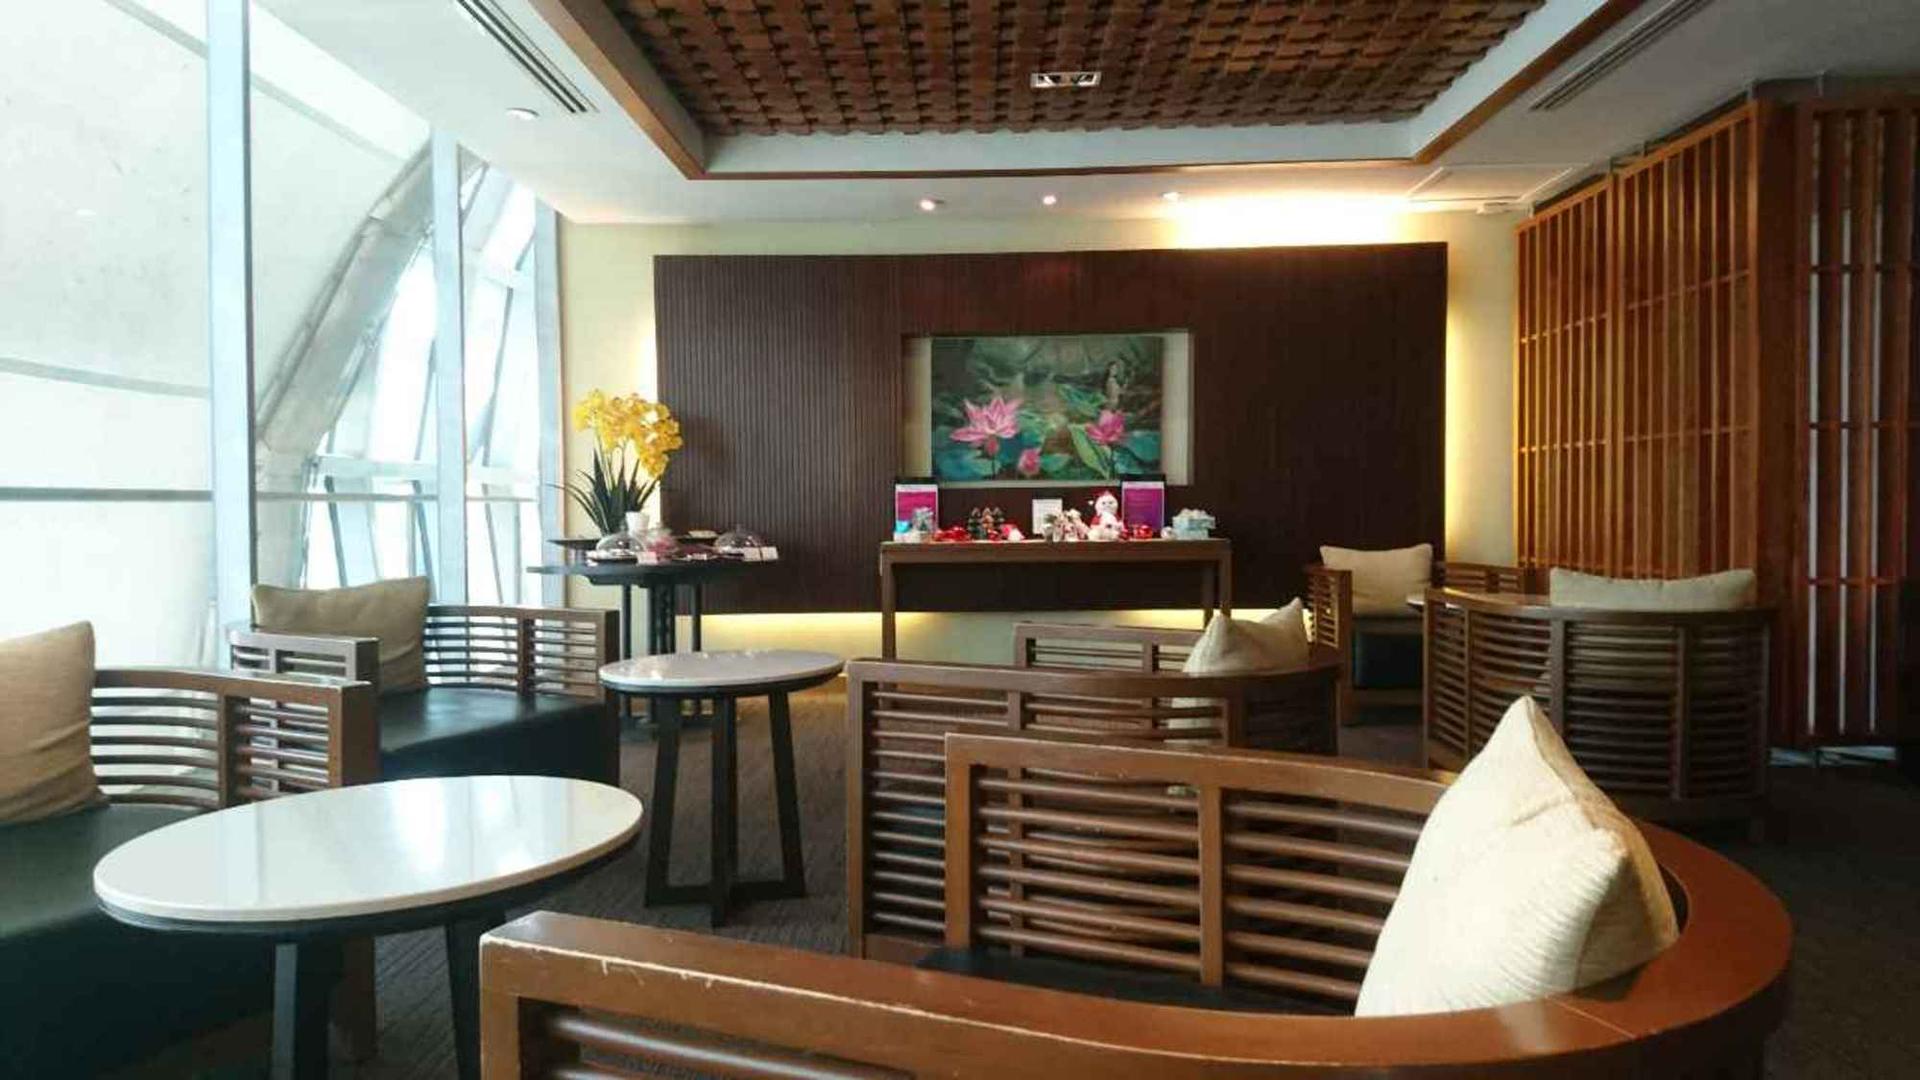 Thai Airways Royal Orchid Spa  image 22 of 25